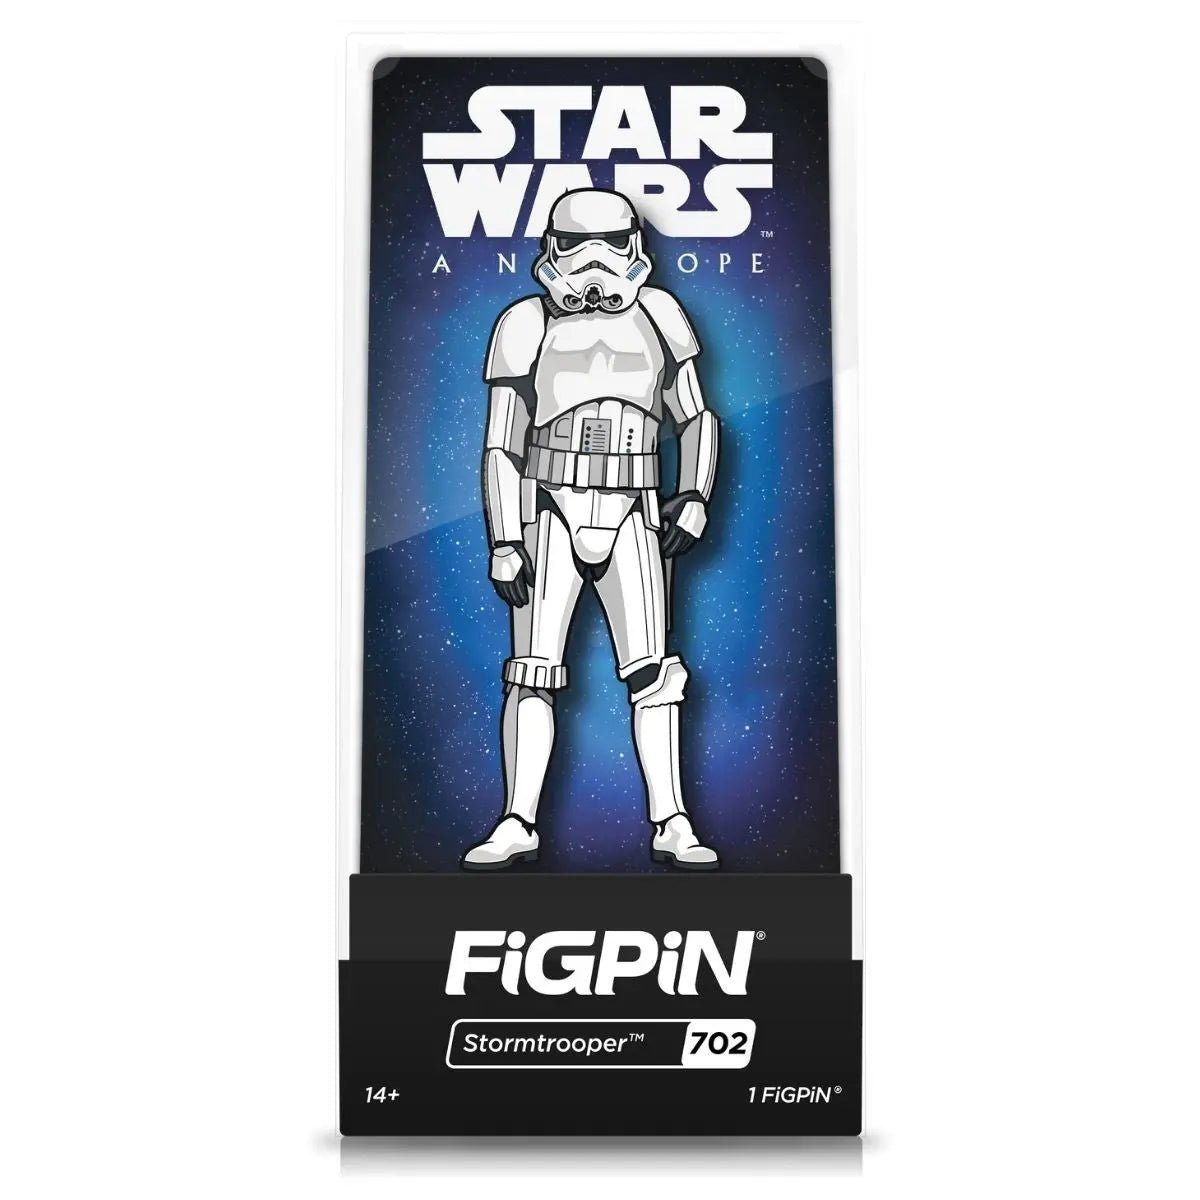 Star Wars: A New Hope Stormtrooper FiGPiN 3-Inch Enamel Pin #702 - Simon's Collectibles